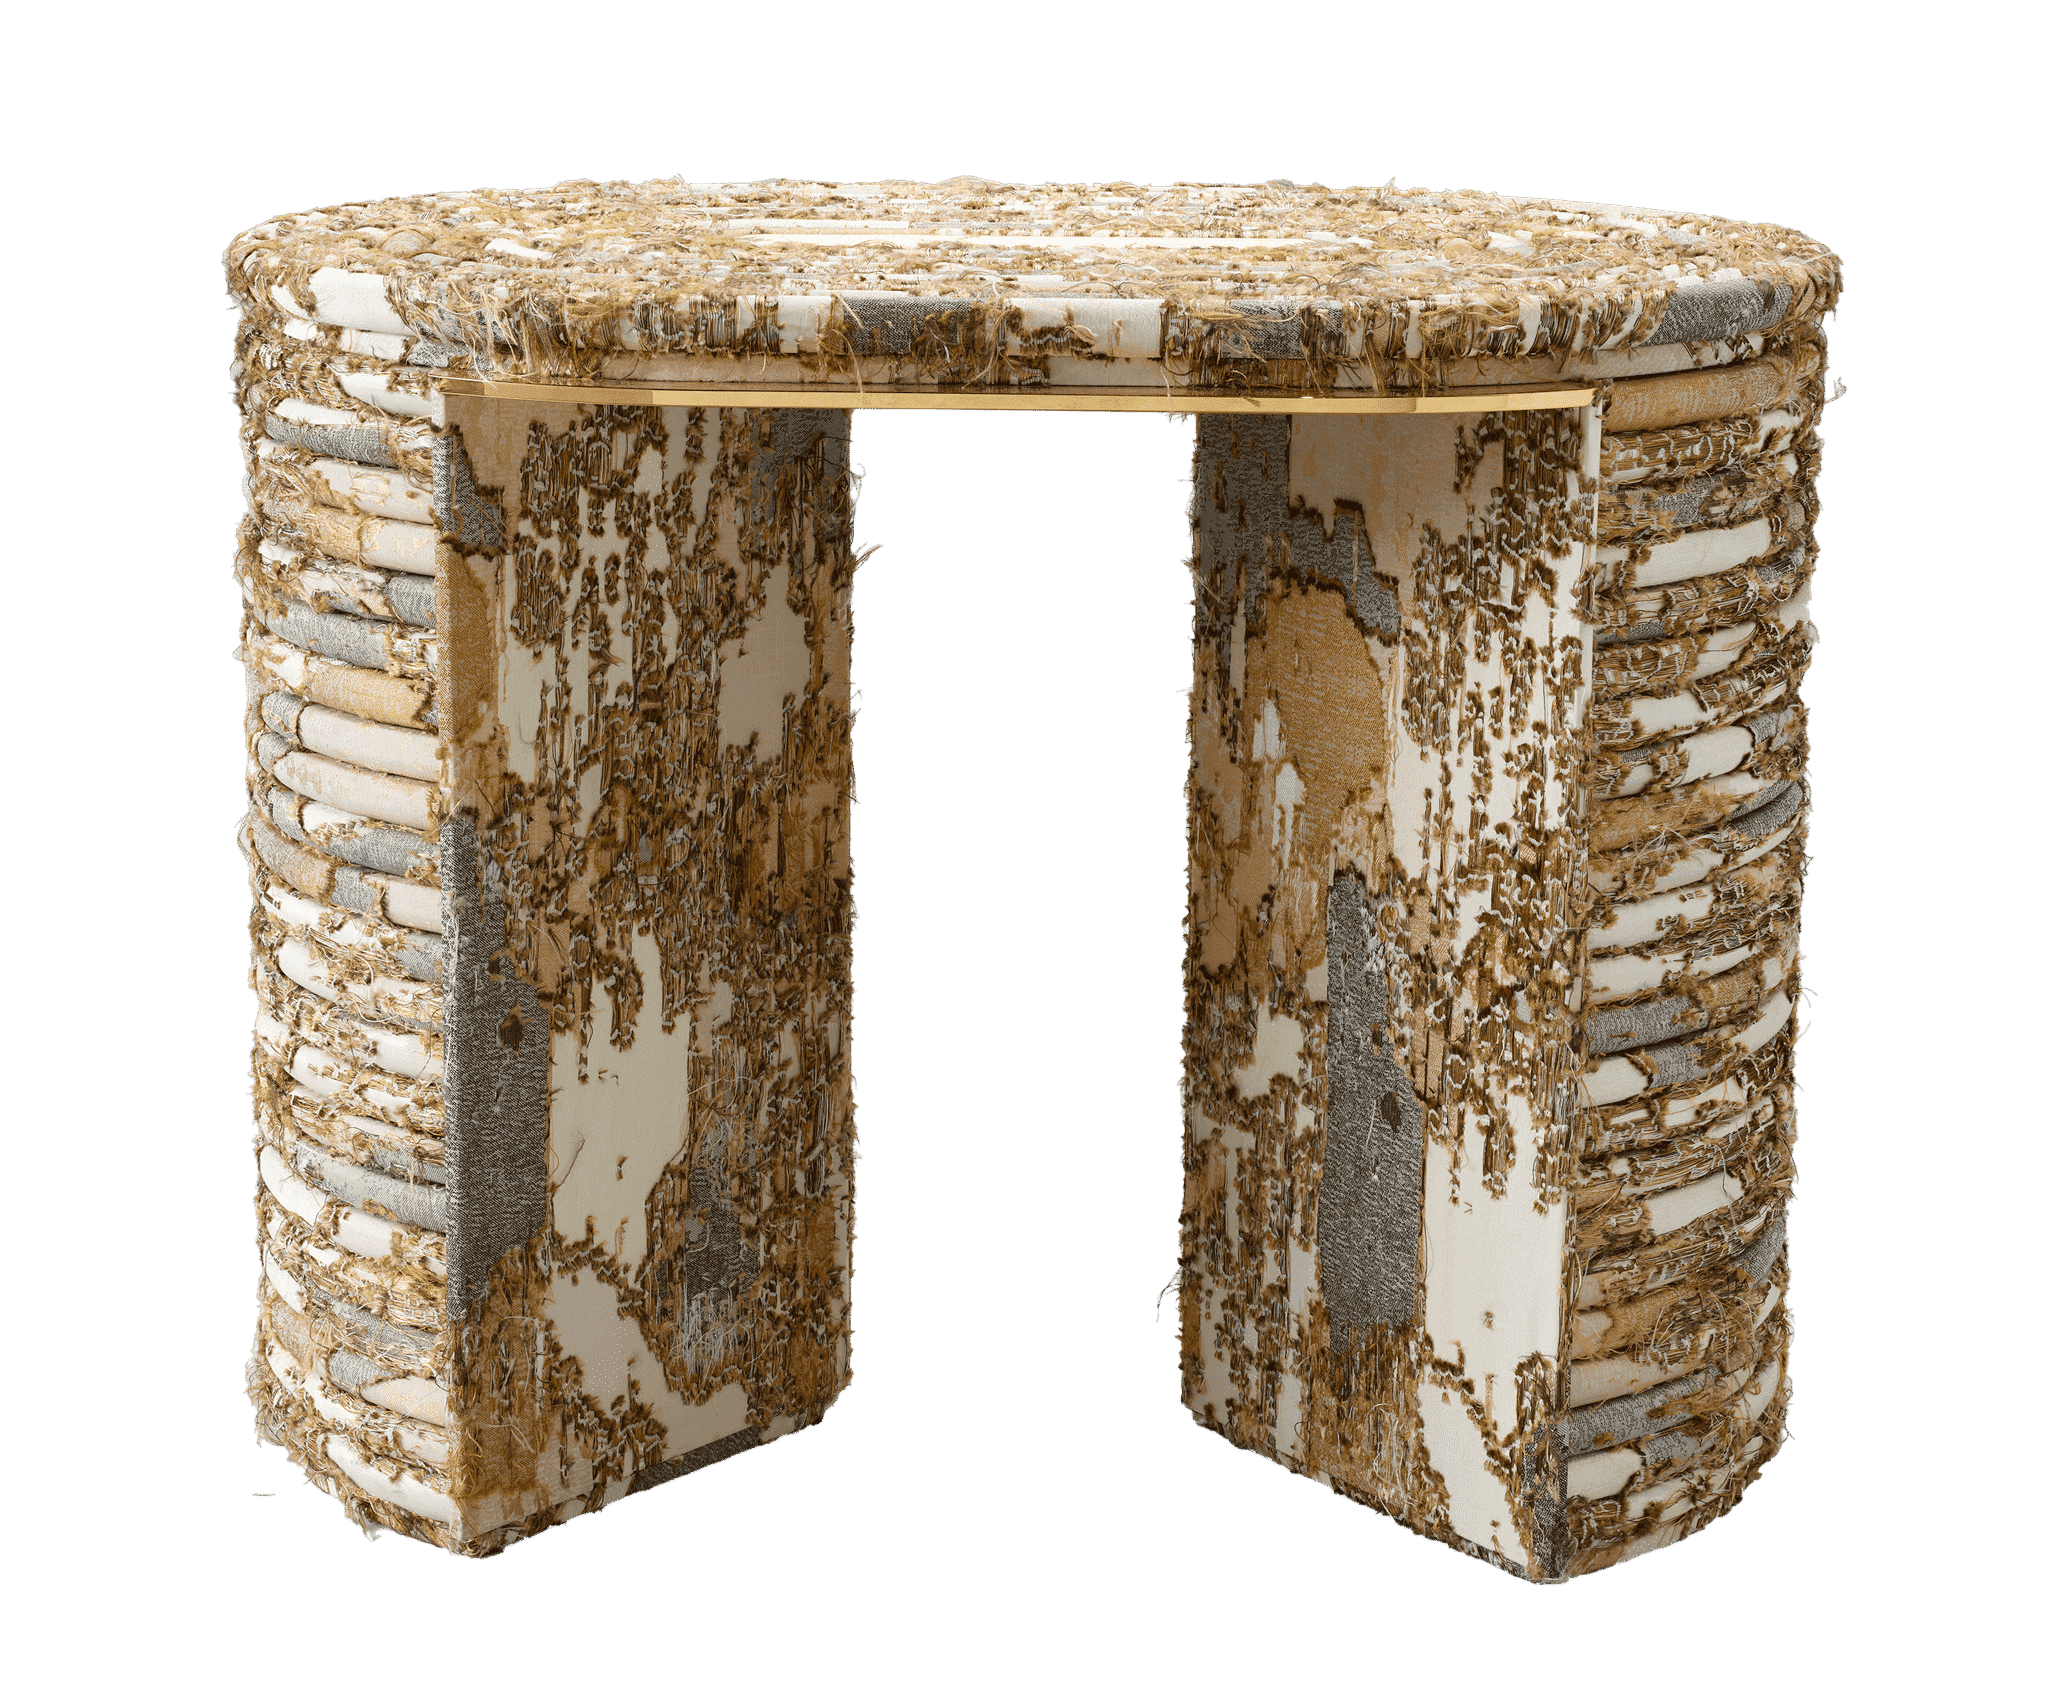 Oval shaped stool seat set atop two wedge-shaped legs. Both seat and legs are covered with fabric made of woven cream, brown, gold, and tan fibers with loose gold and white threads that create a highly textured surface.